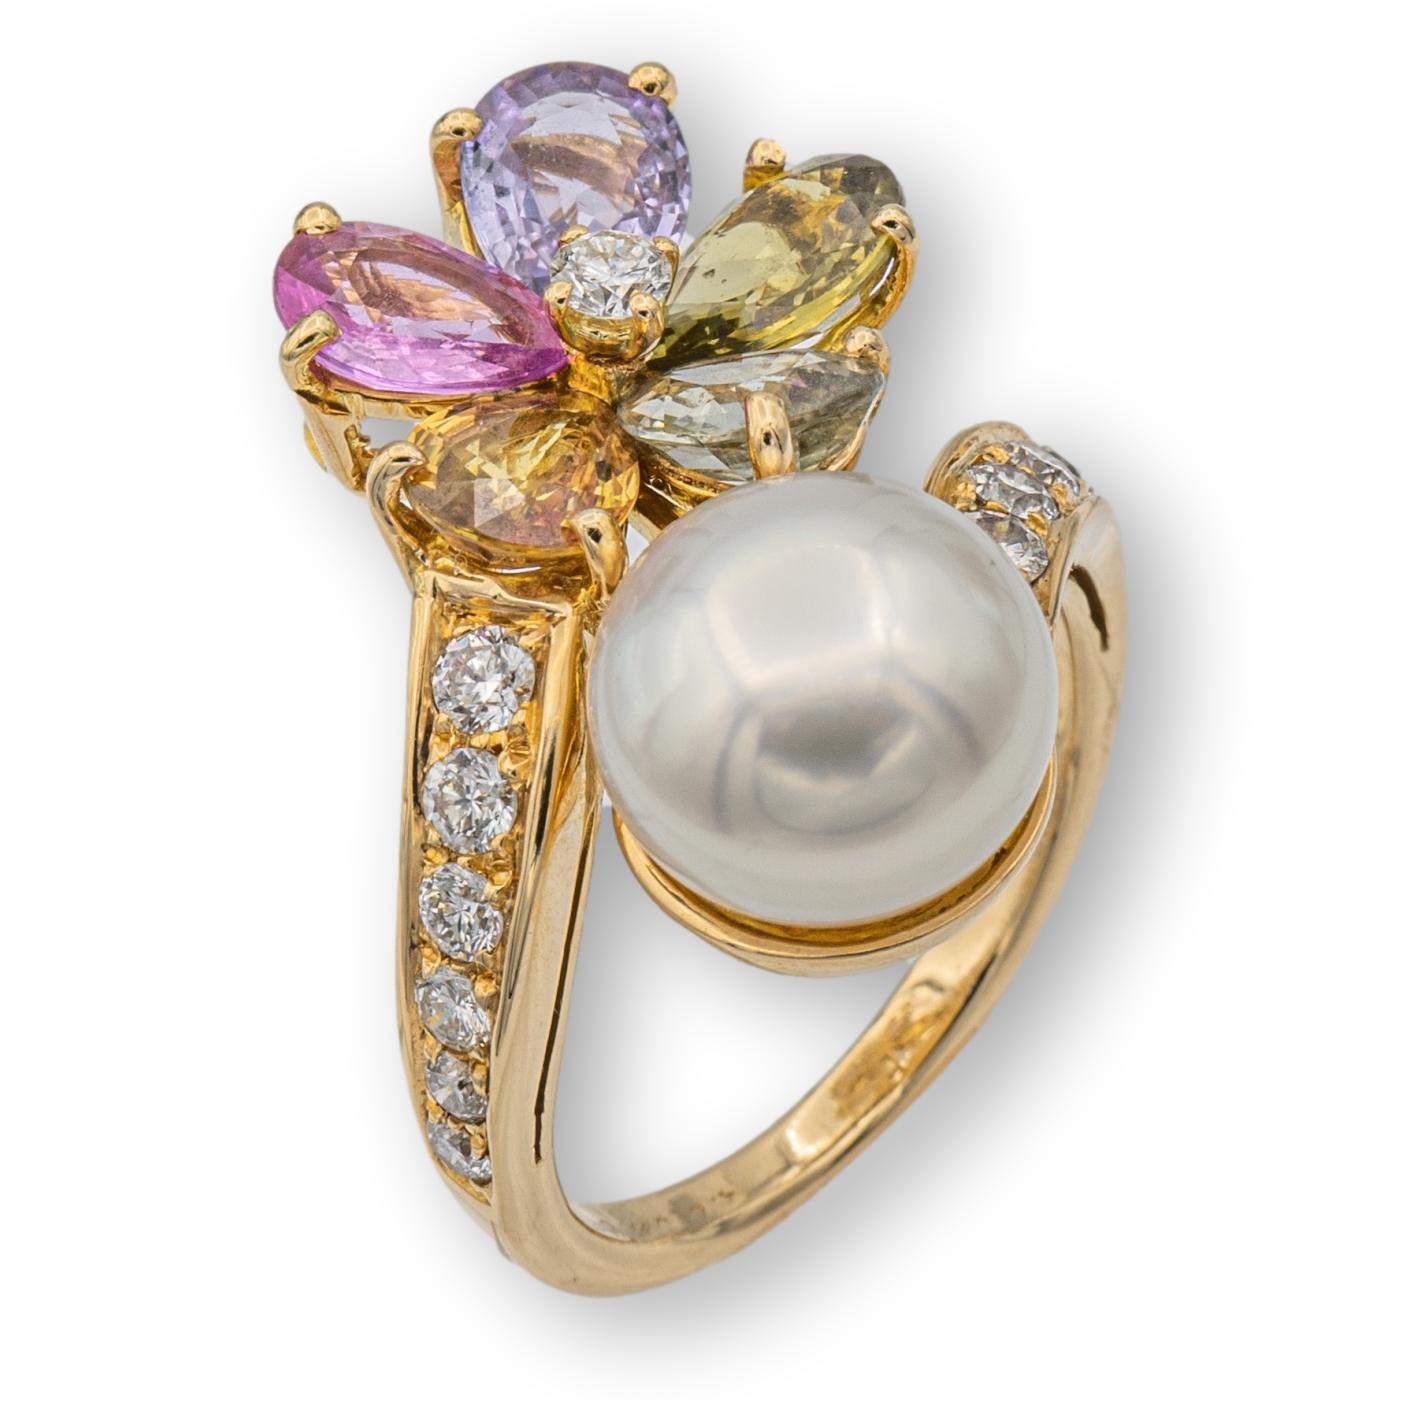 Vintage Bvlgari bypass ring from the Contraire collection finely crafted in 18 karat yellow gold featuring a flower motif adorned with pear shape multicolor sapphires weighing 0.50 carats each approximately and a 10 mm south sea pearl. The ring has